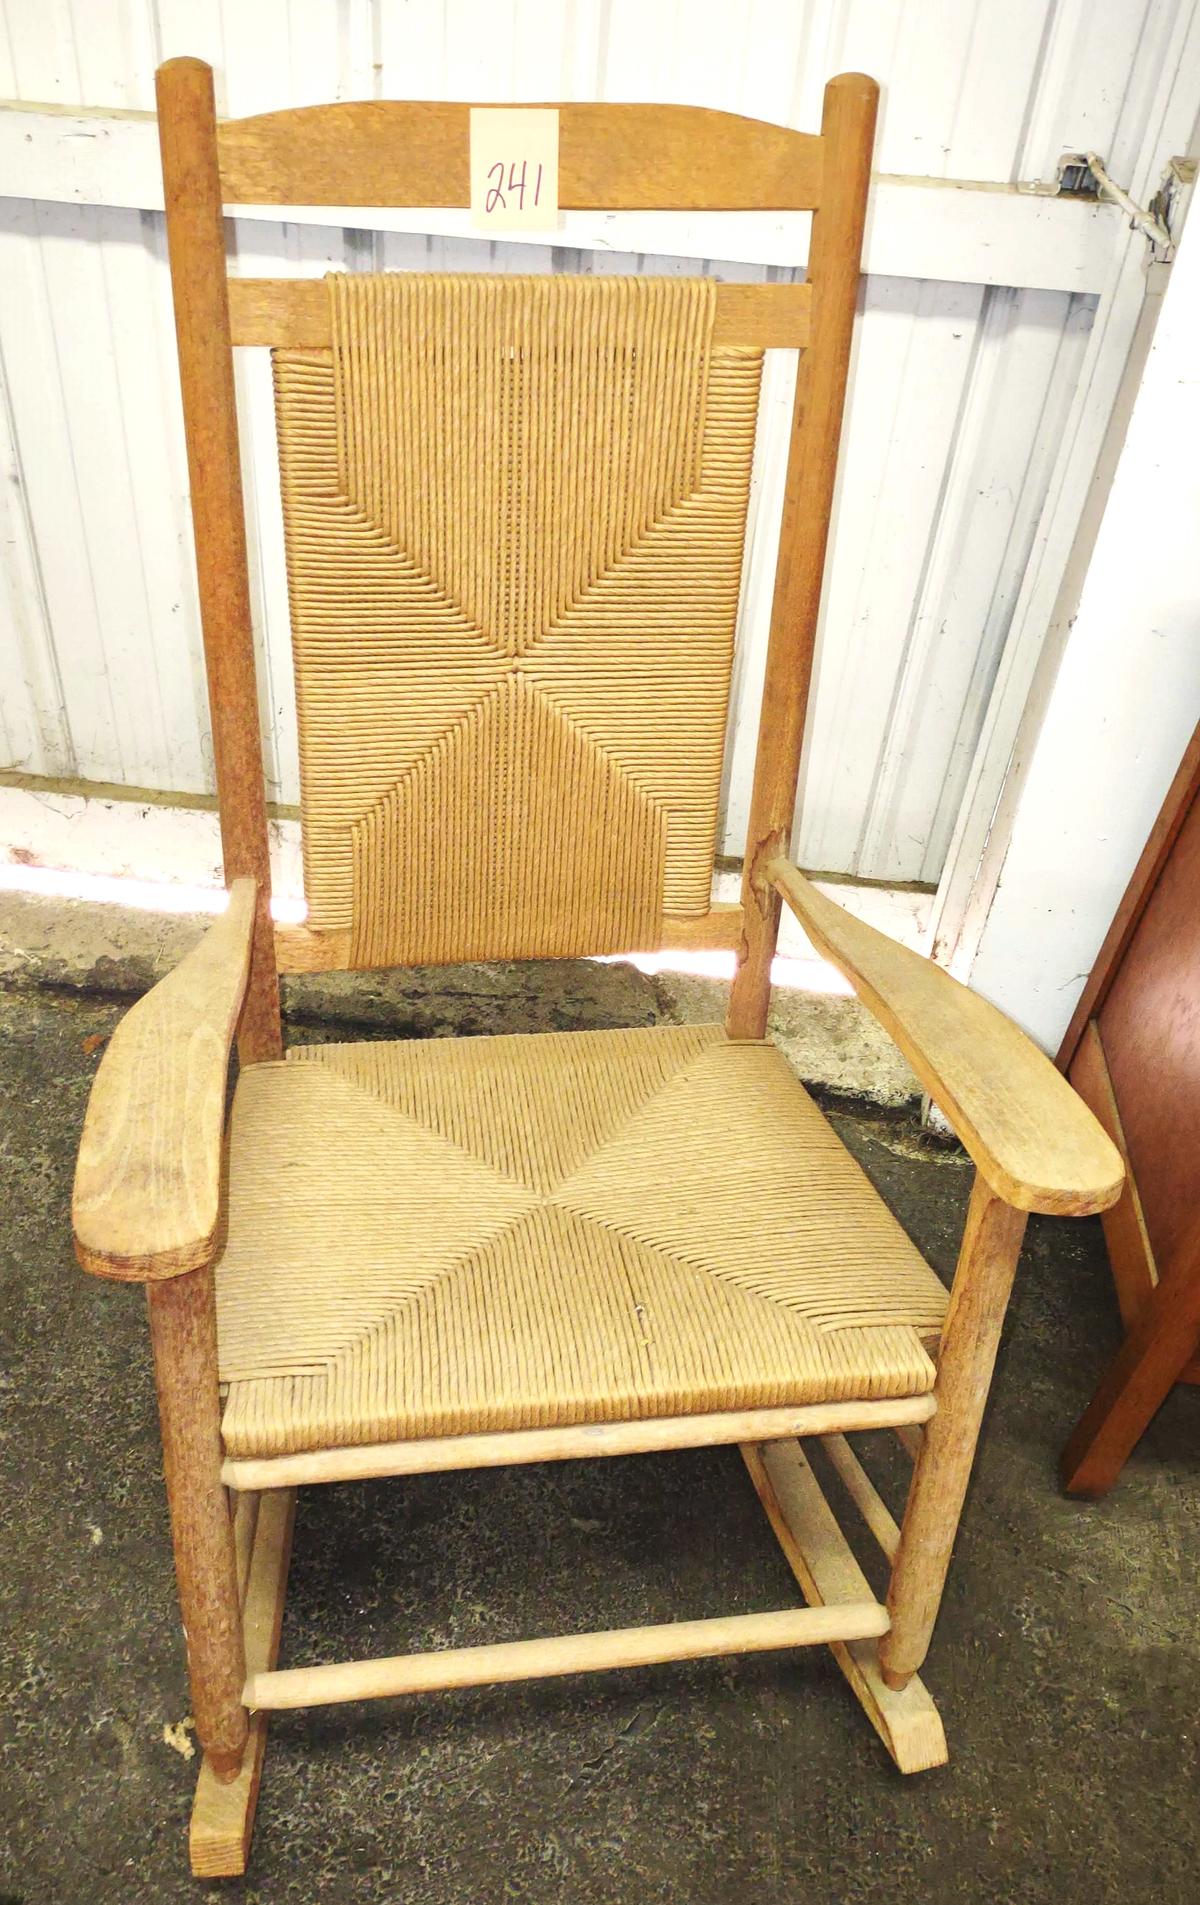 RUSTIC WOVEN ROCKING CHAIR - PICK UP ONLY